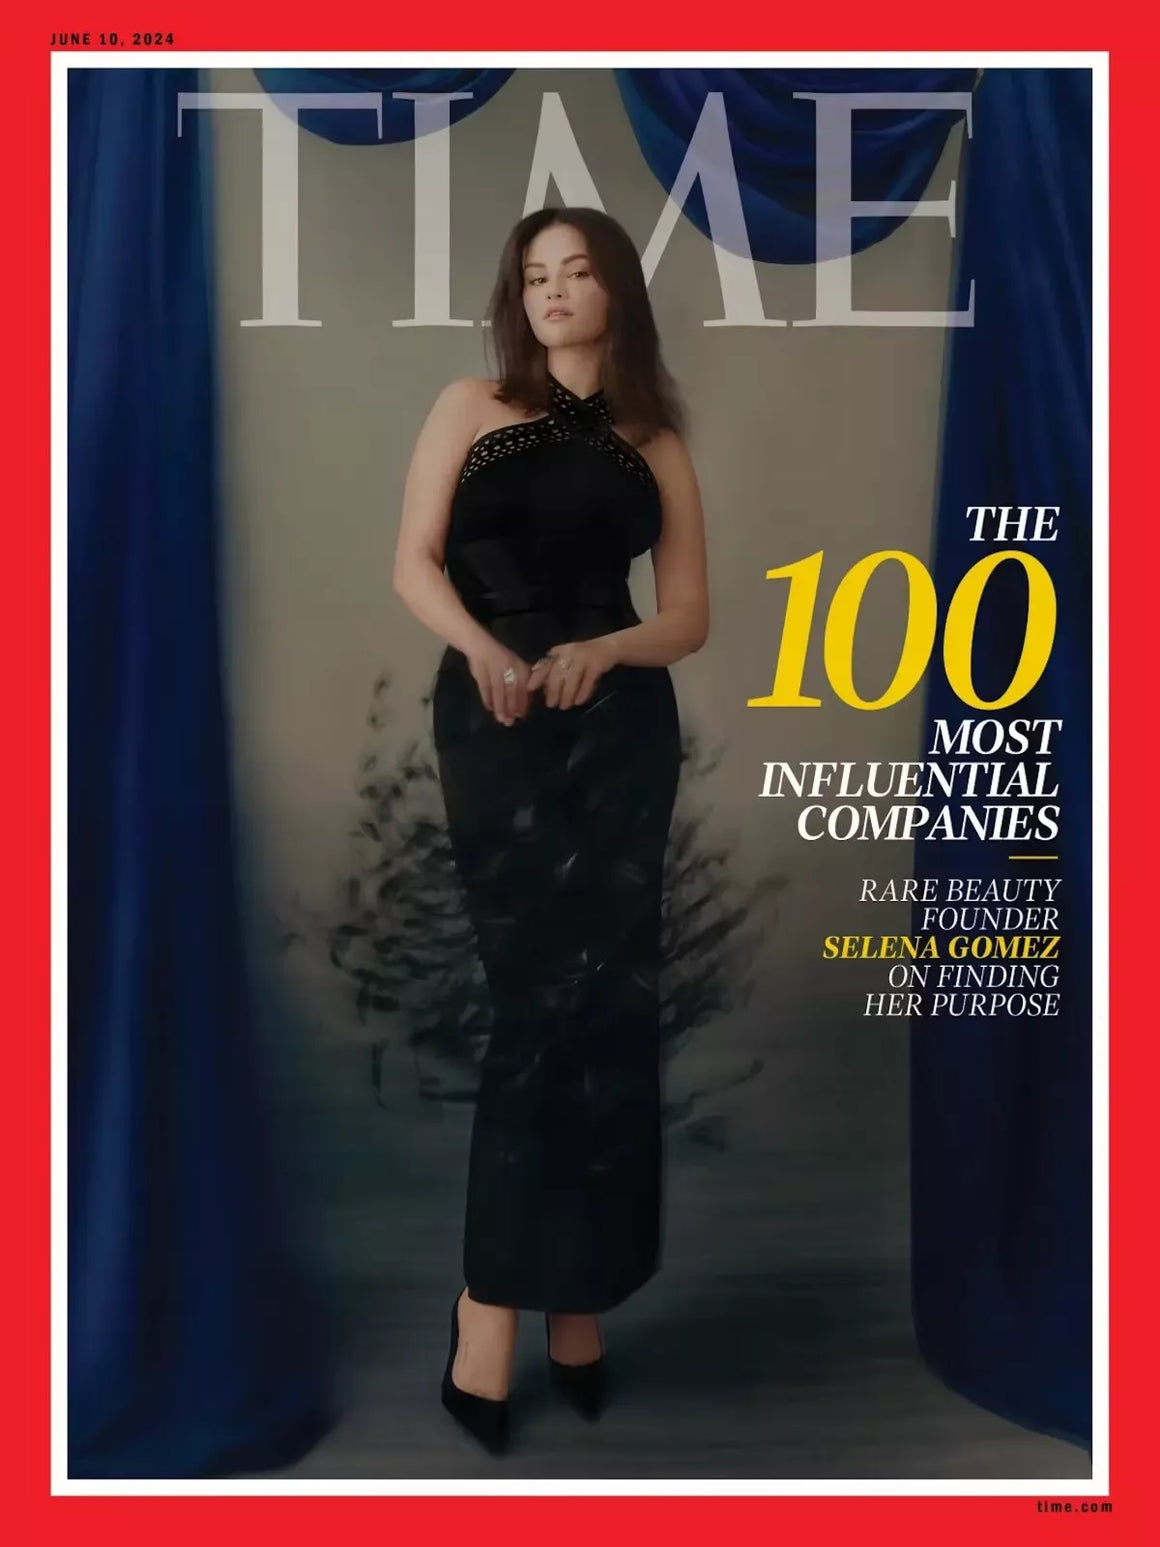 TIME Magazine 10th June 2024 - The 100 Most Influential Companies; Selena Gomez